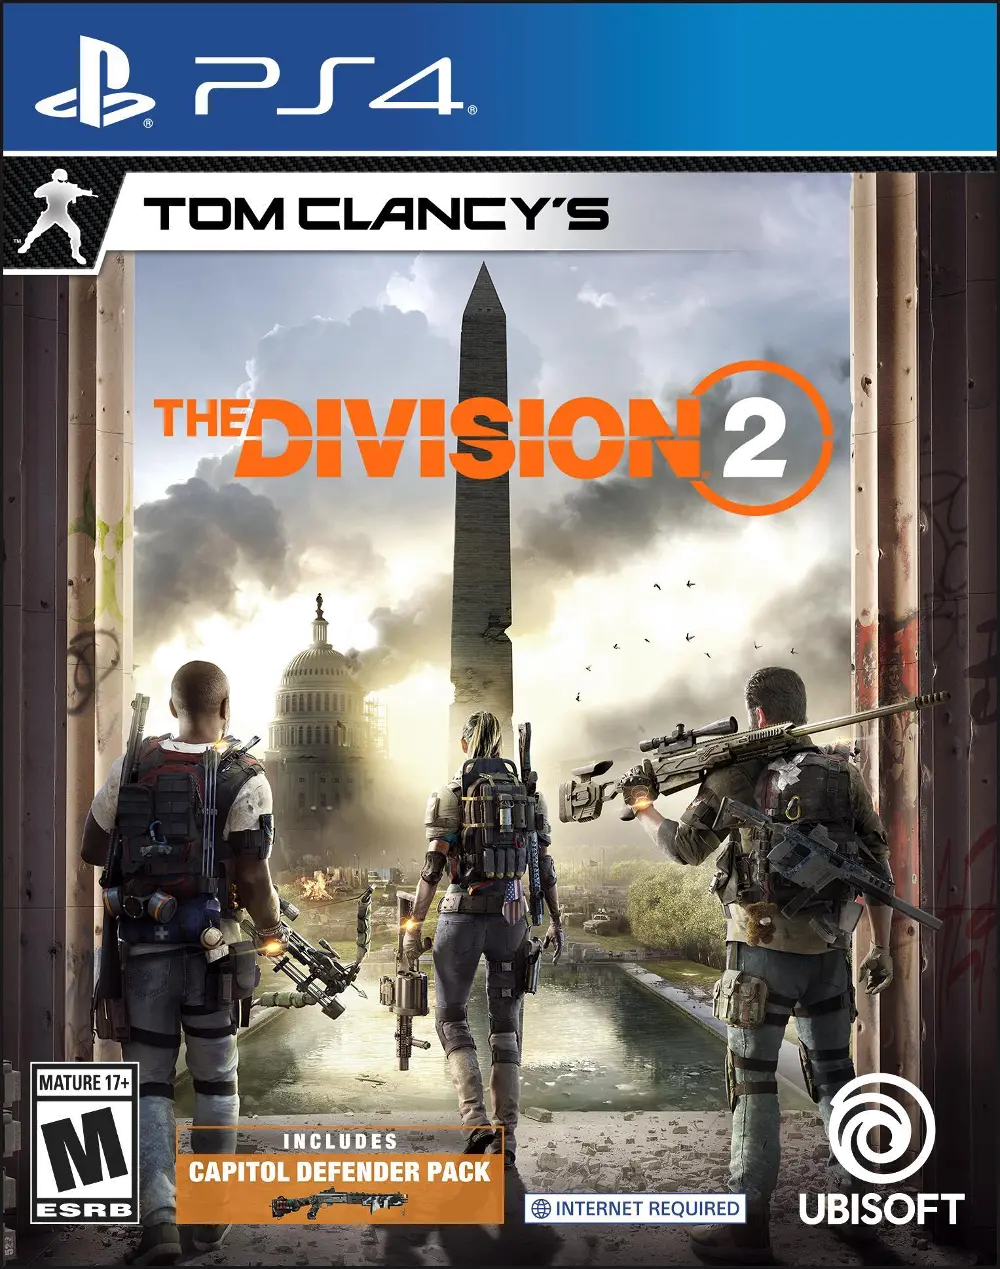 PS4/THE_DIVISION_2 Tom Clancy's The Division 2 - PS4-1